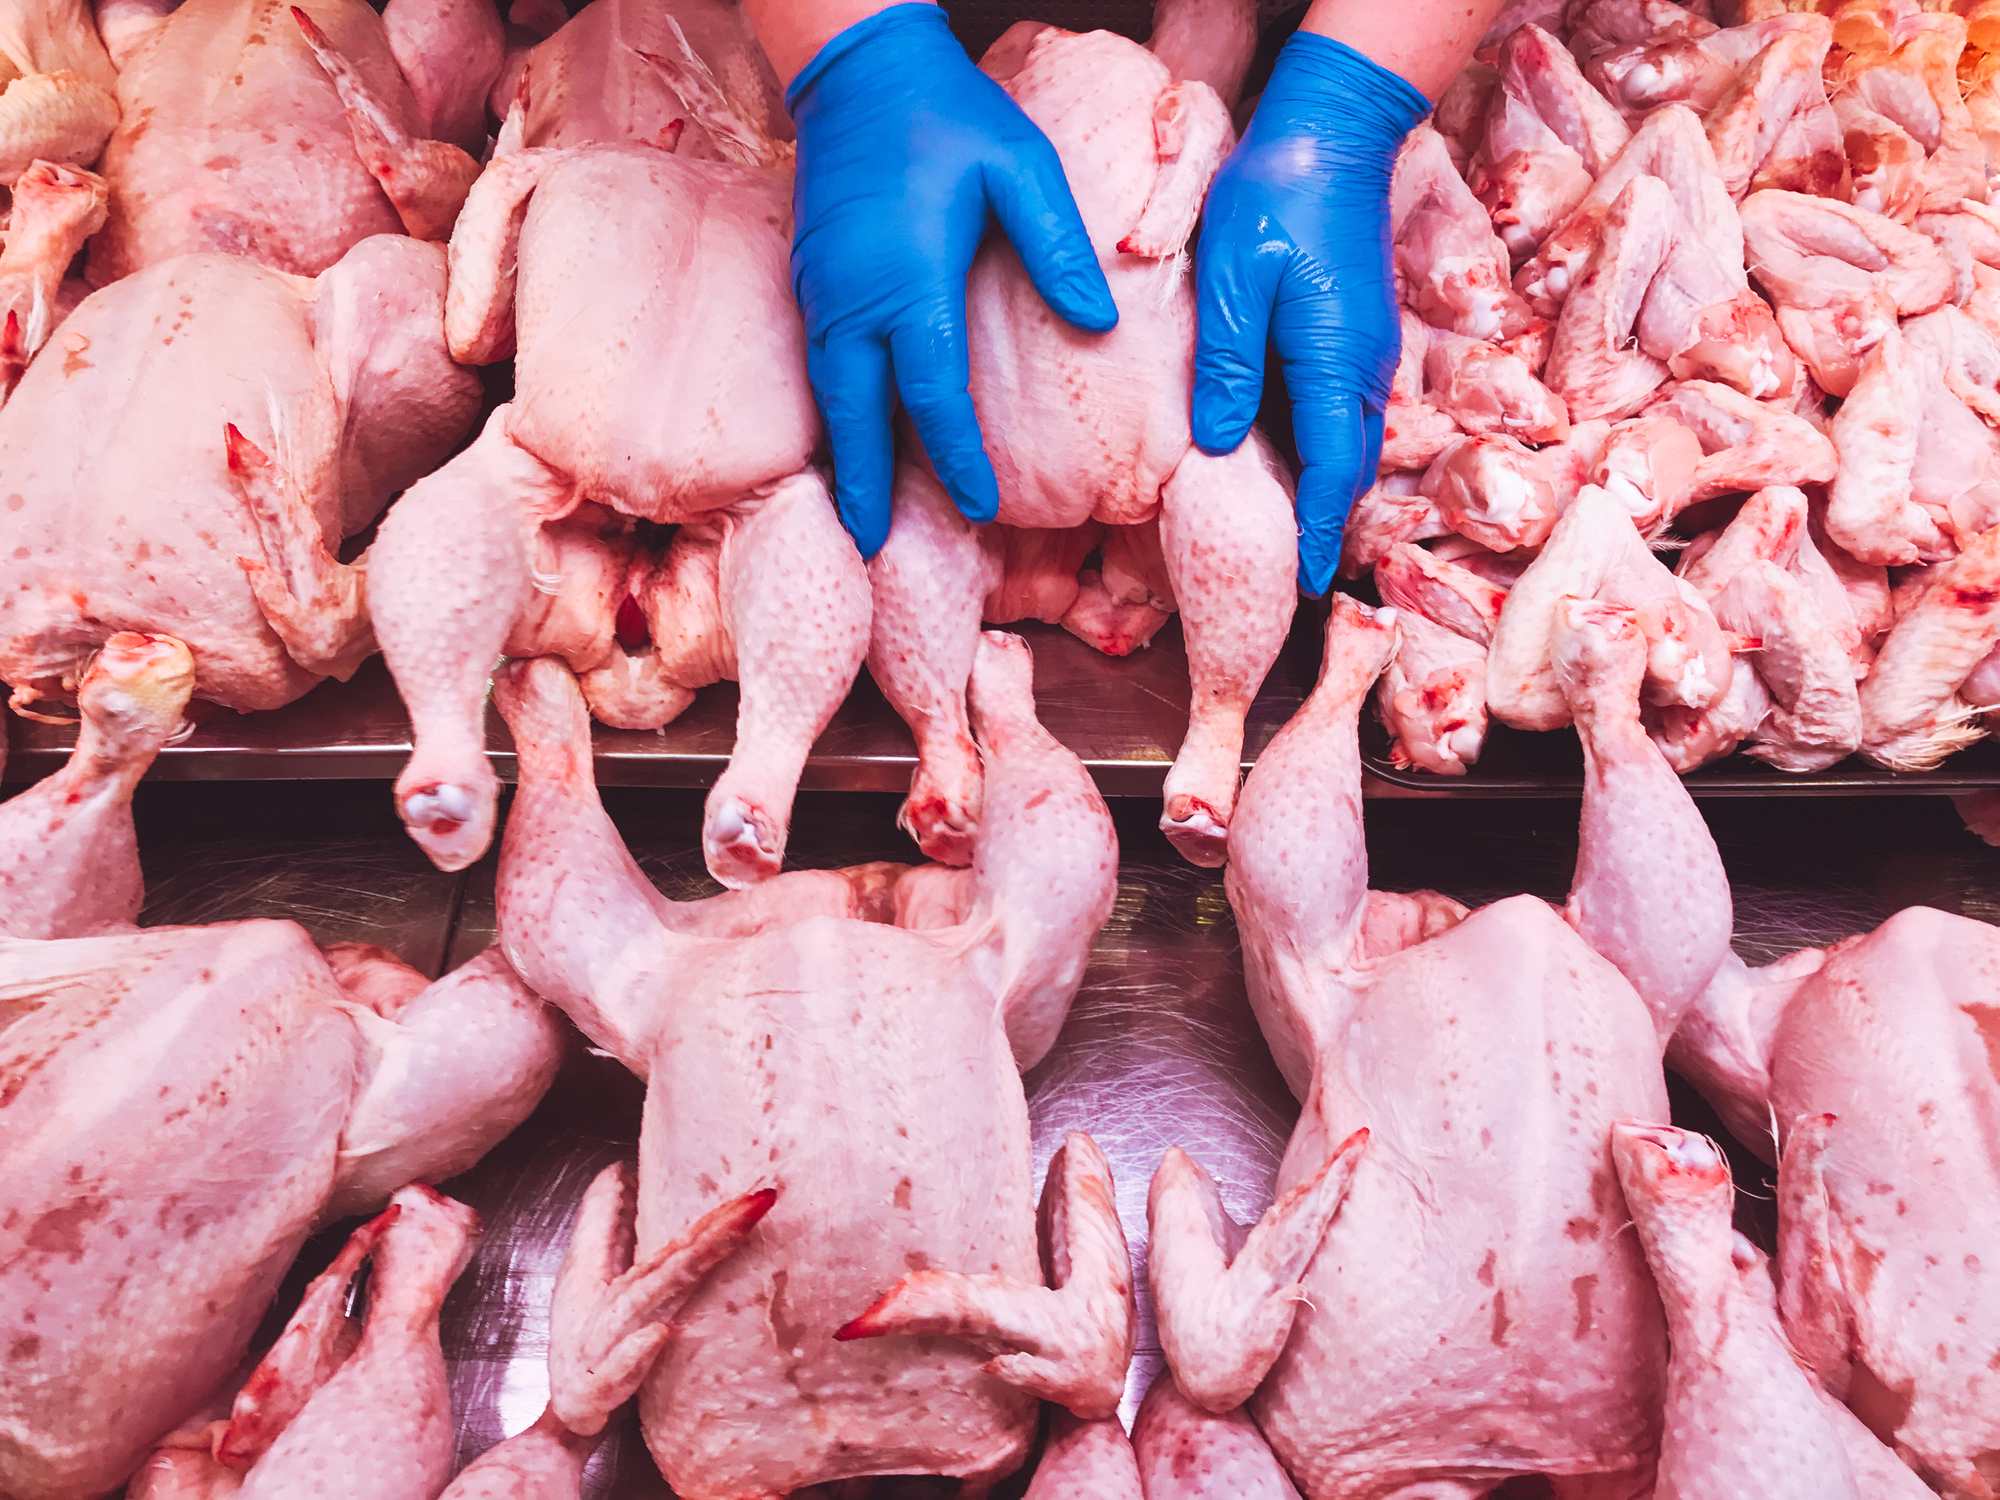 Hands with blue gloves handling chickens in a butcher shop